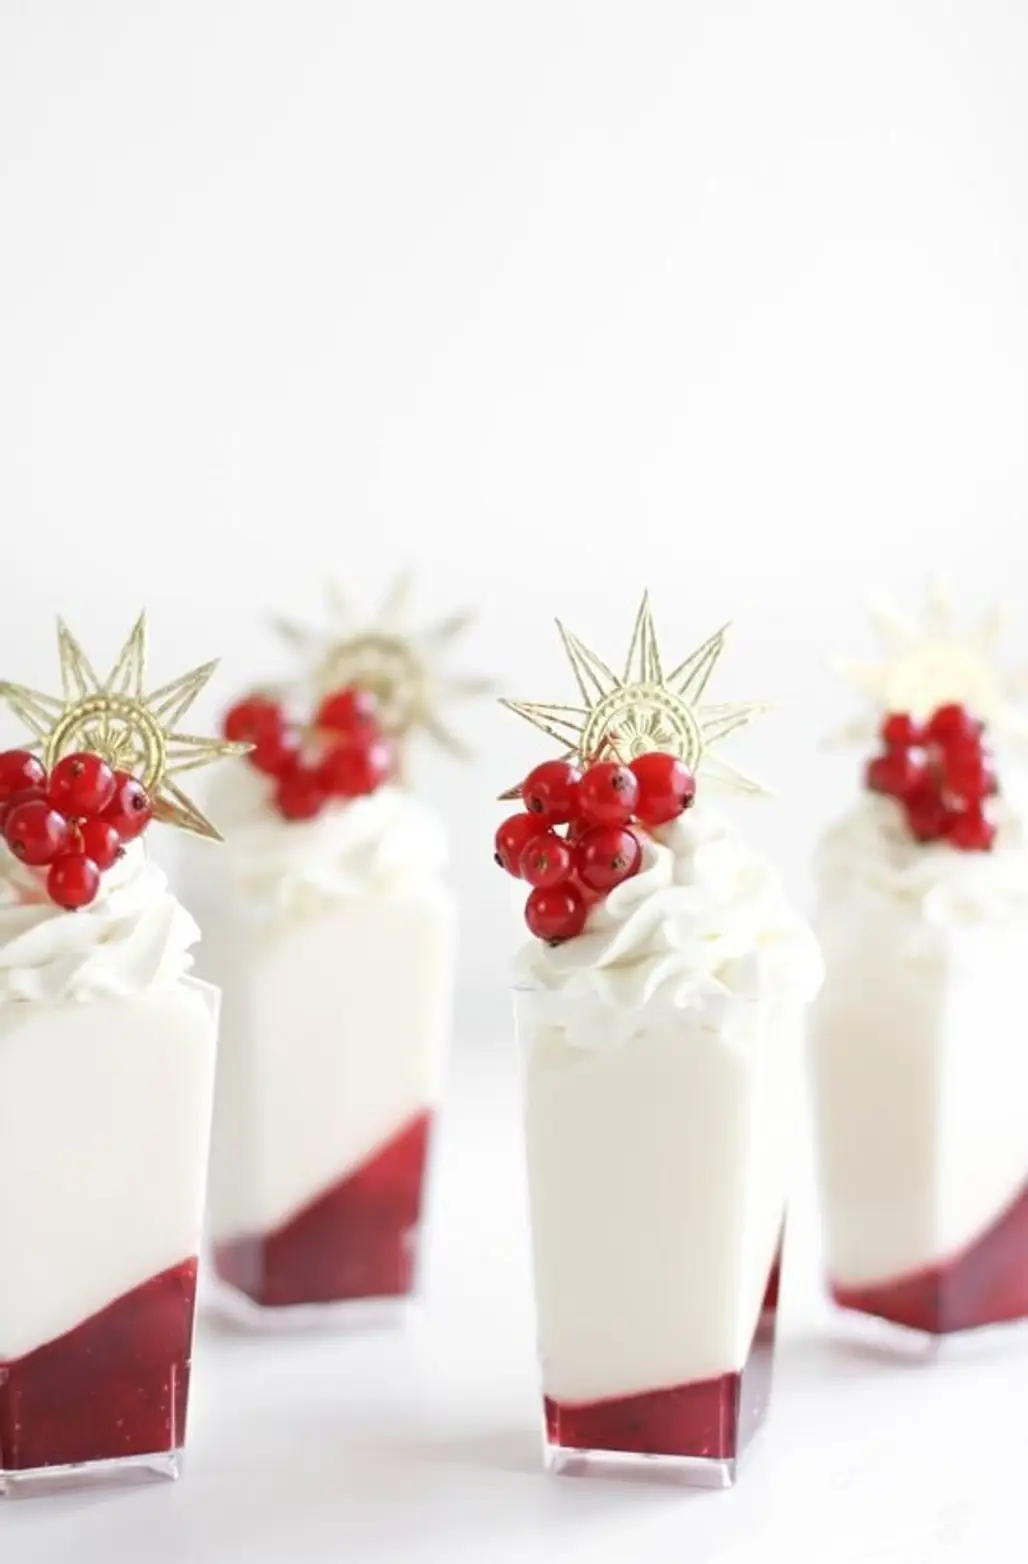 Winter White Marshmallow Mousse and Red Currant Verrines